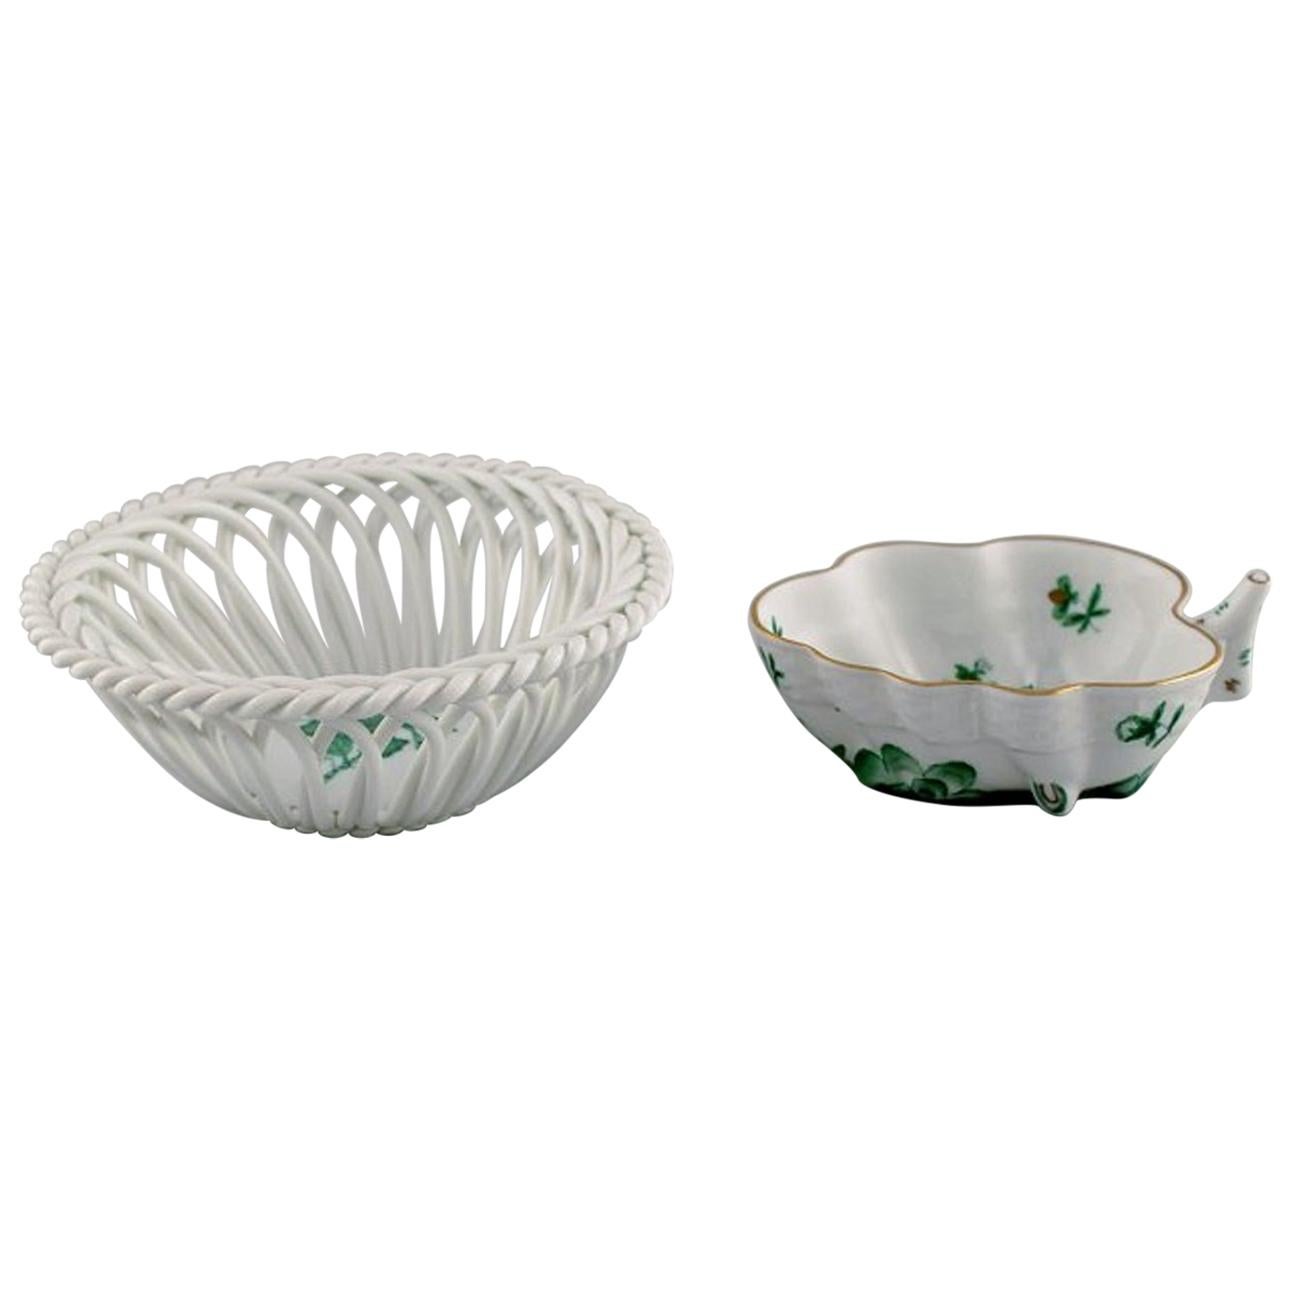 Herend "Green Chinese Bouquet", Two Porcelain Bowls with Gold Decoration